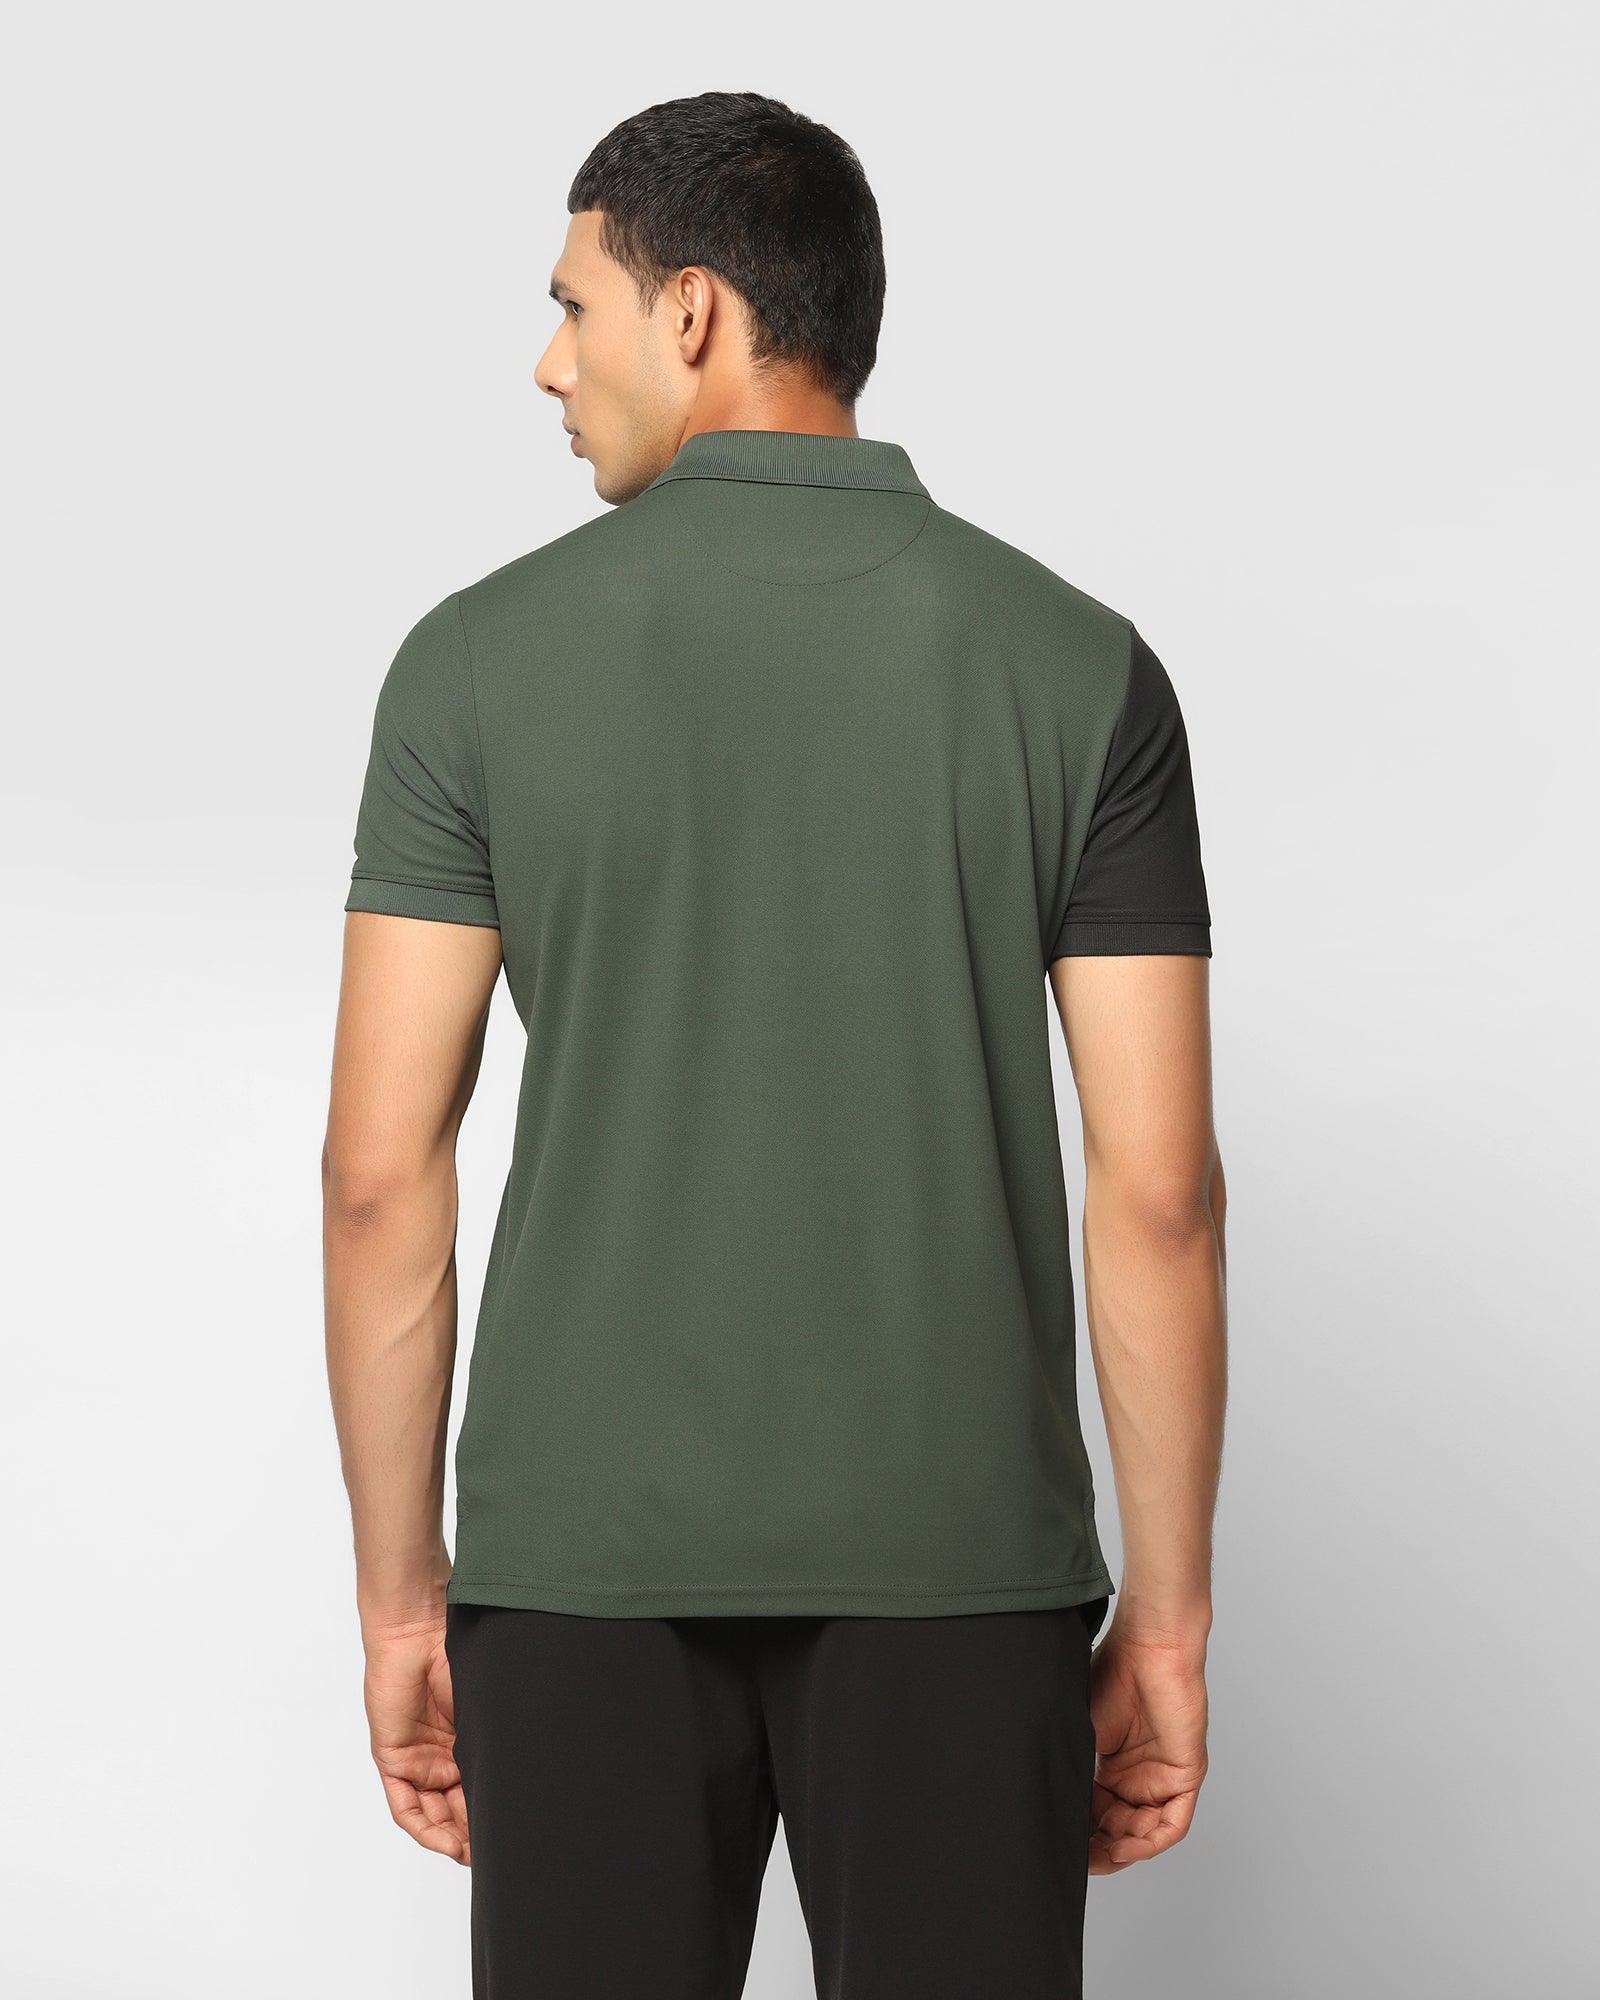 TechPro Polo Olive Solid T Shirt - Crypto